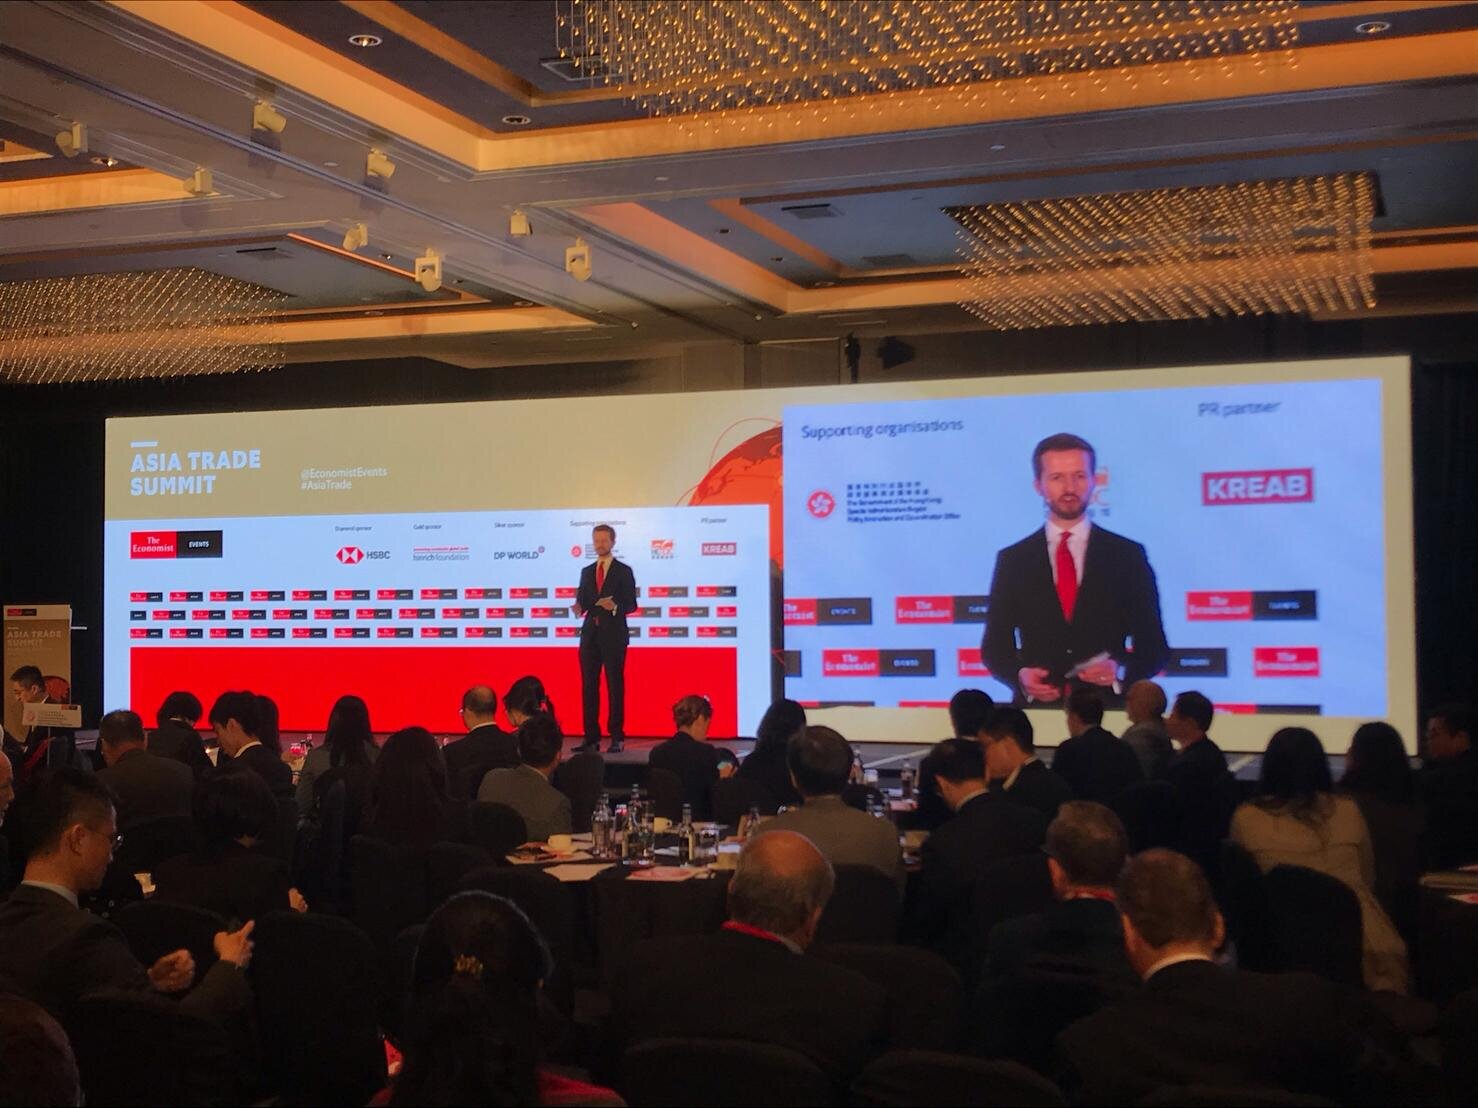   Chairing The Economist Event’s Asia Trade Summit in Hong Kong  